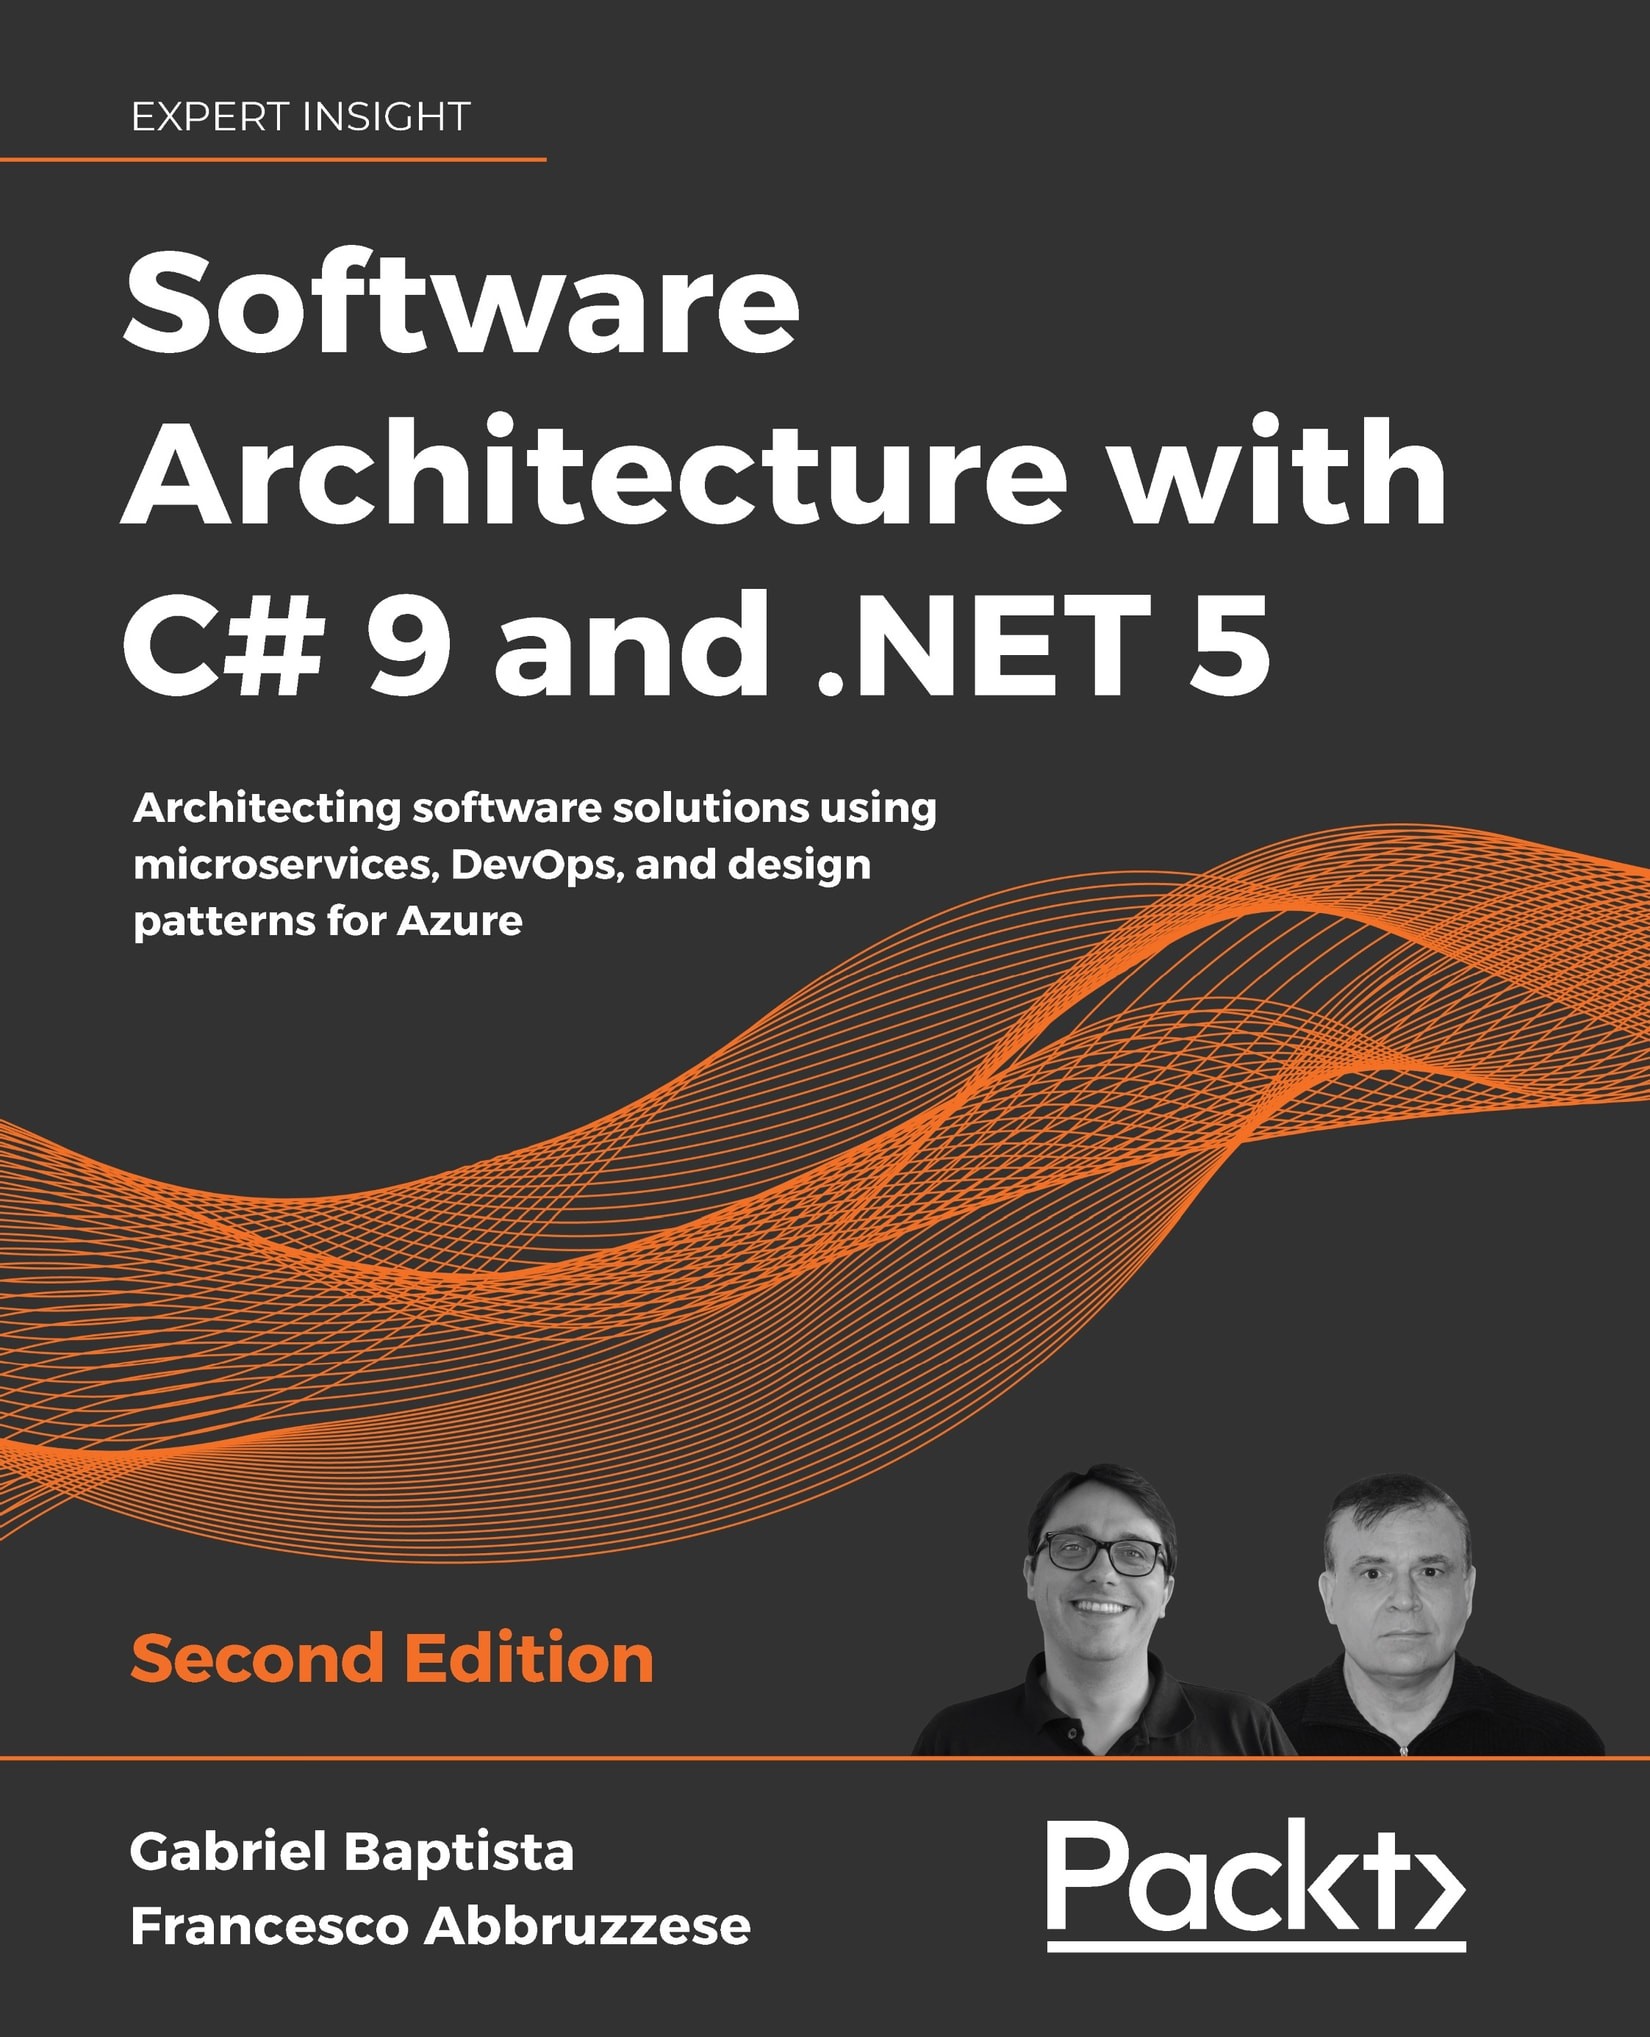 Software Architecture With C# 9 and .NET 5 - Second Edition: Architecting Software Solutions Using Microservices, DevOps, and Design Patterns for Azure Cloud